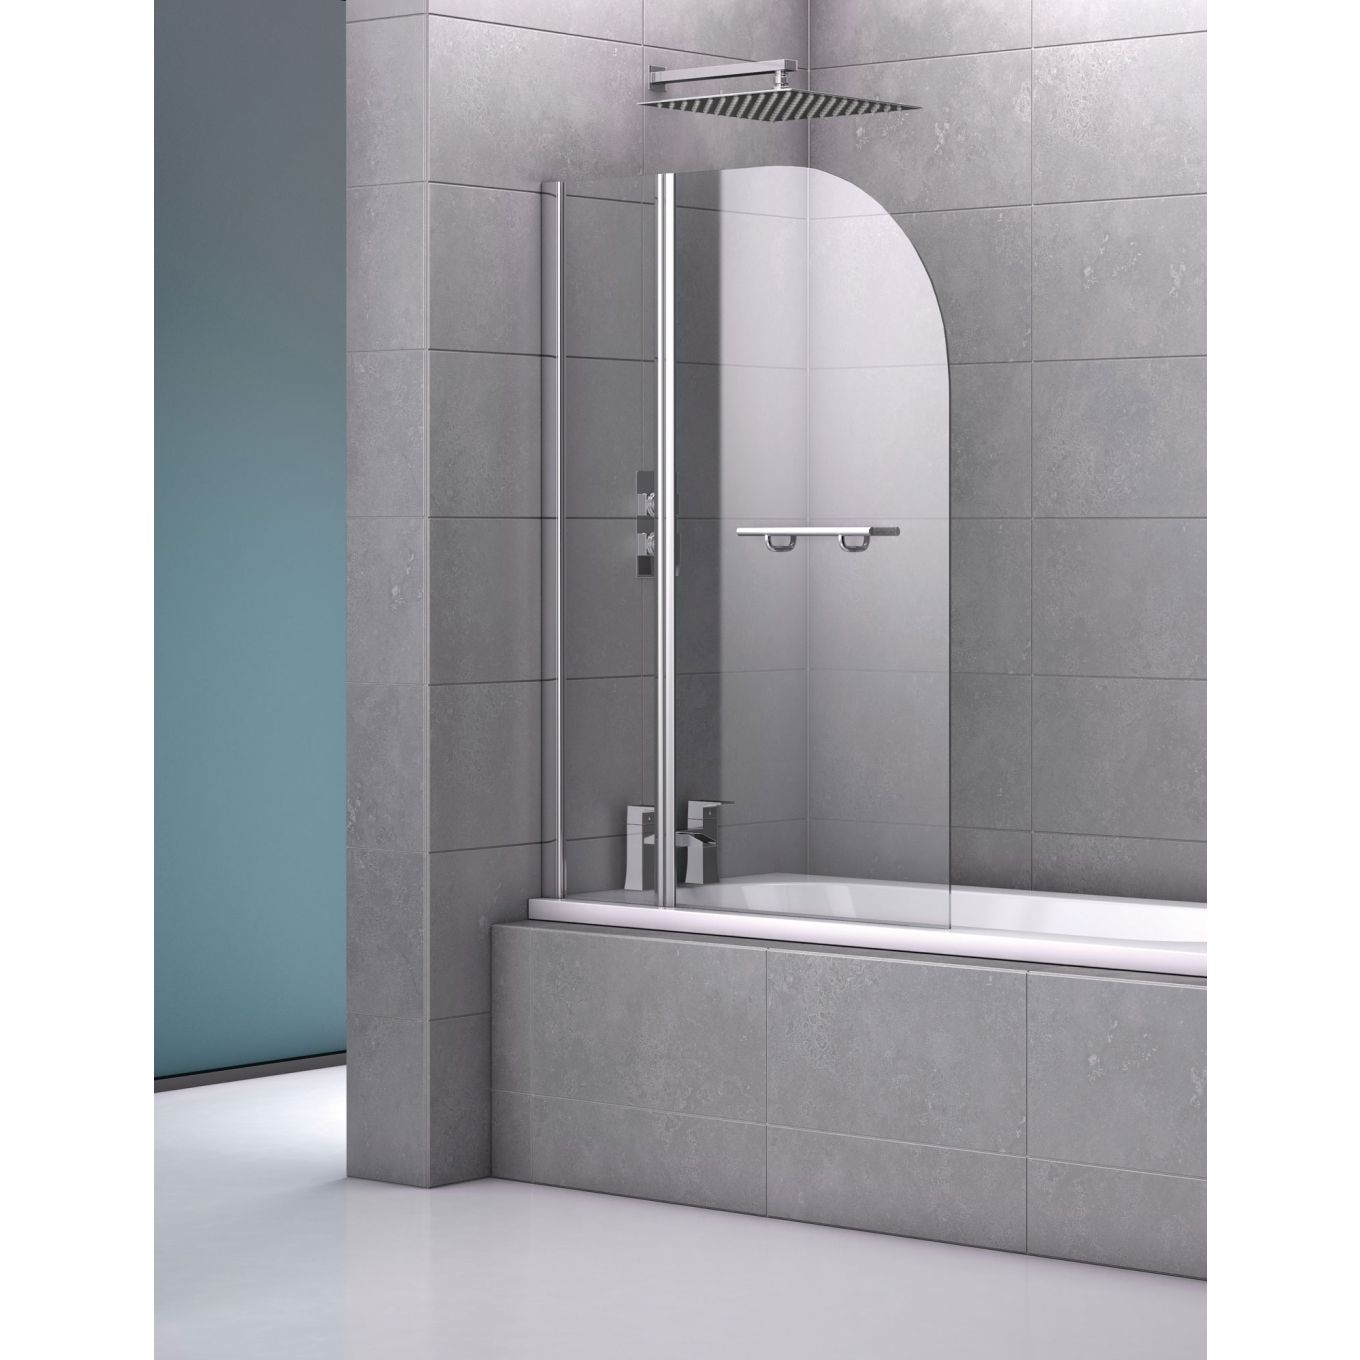 Double Curved Bath Screen with Towel Rail